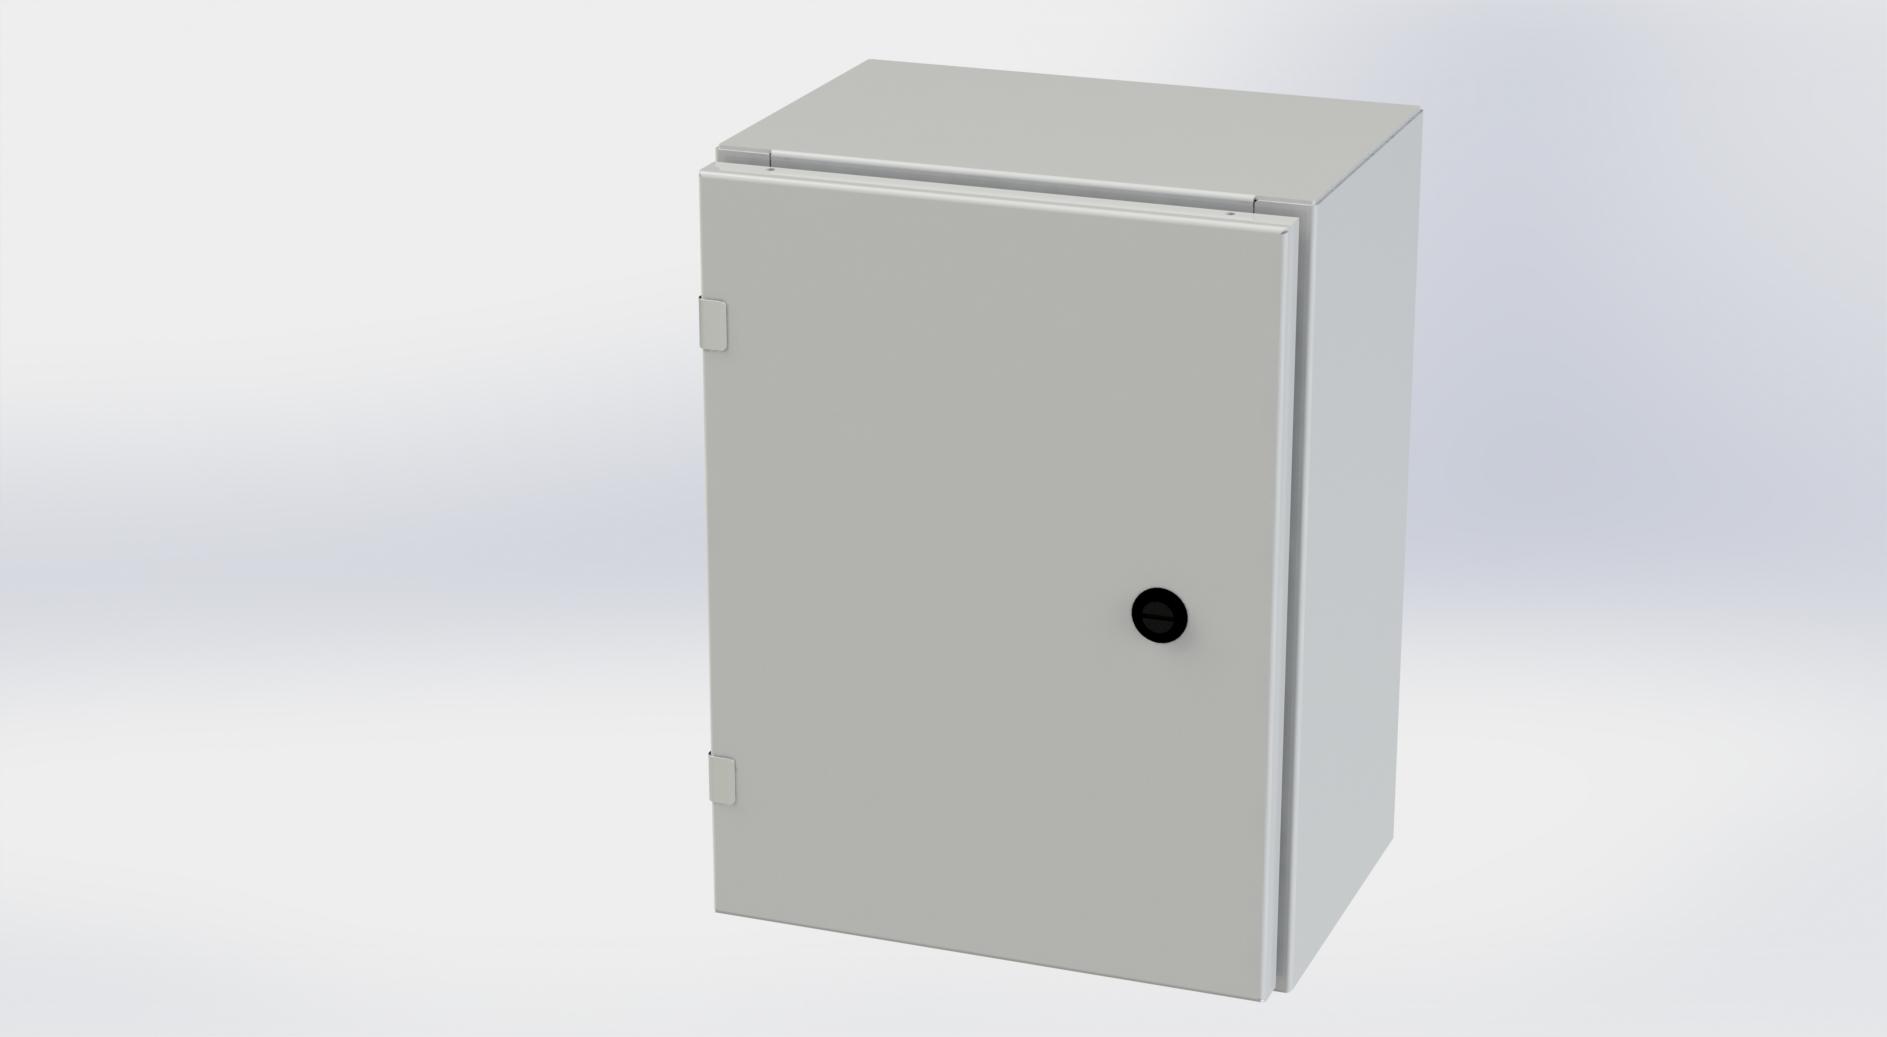 Saginaw Control SCE-16EL1208LPLG EL Enclosure, Height:16.00", Width:12.00", Depth:8.00", RAL 7035 gray powder coating inside and out. Optional sub-panels are powder coated white.